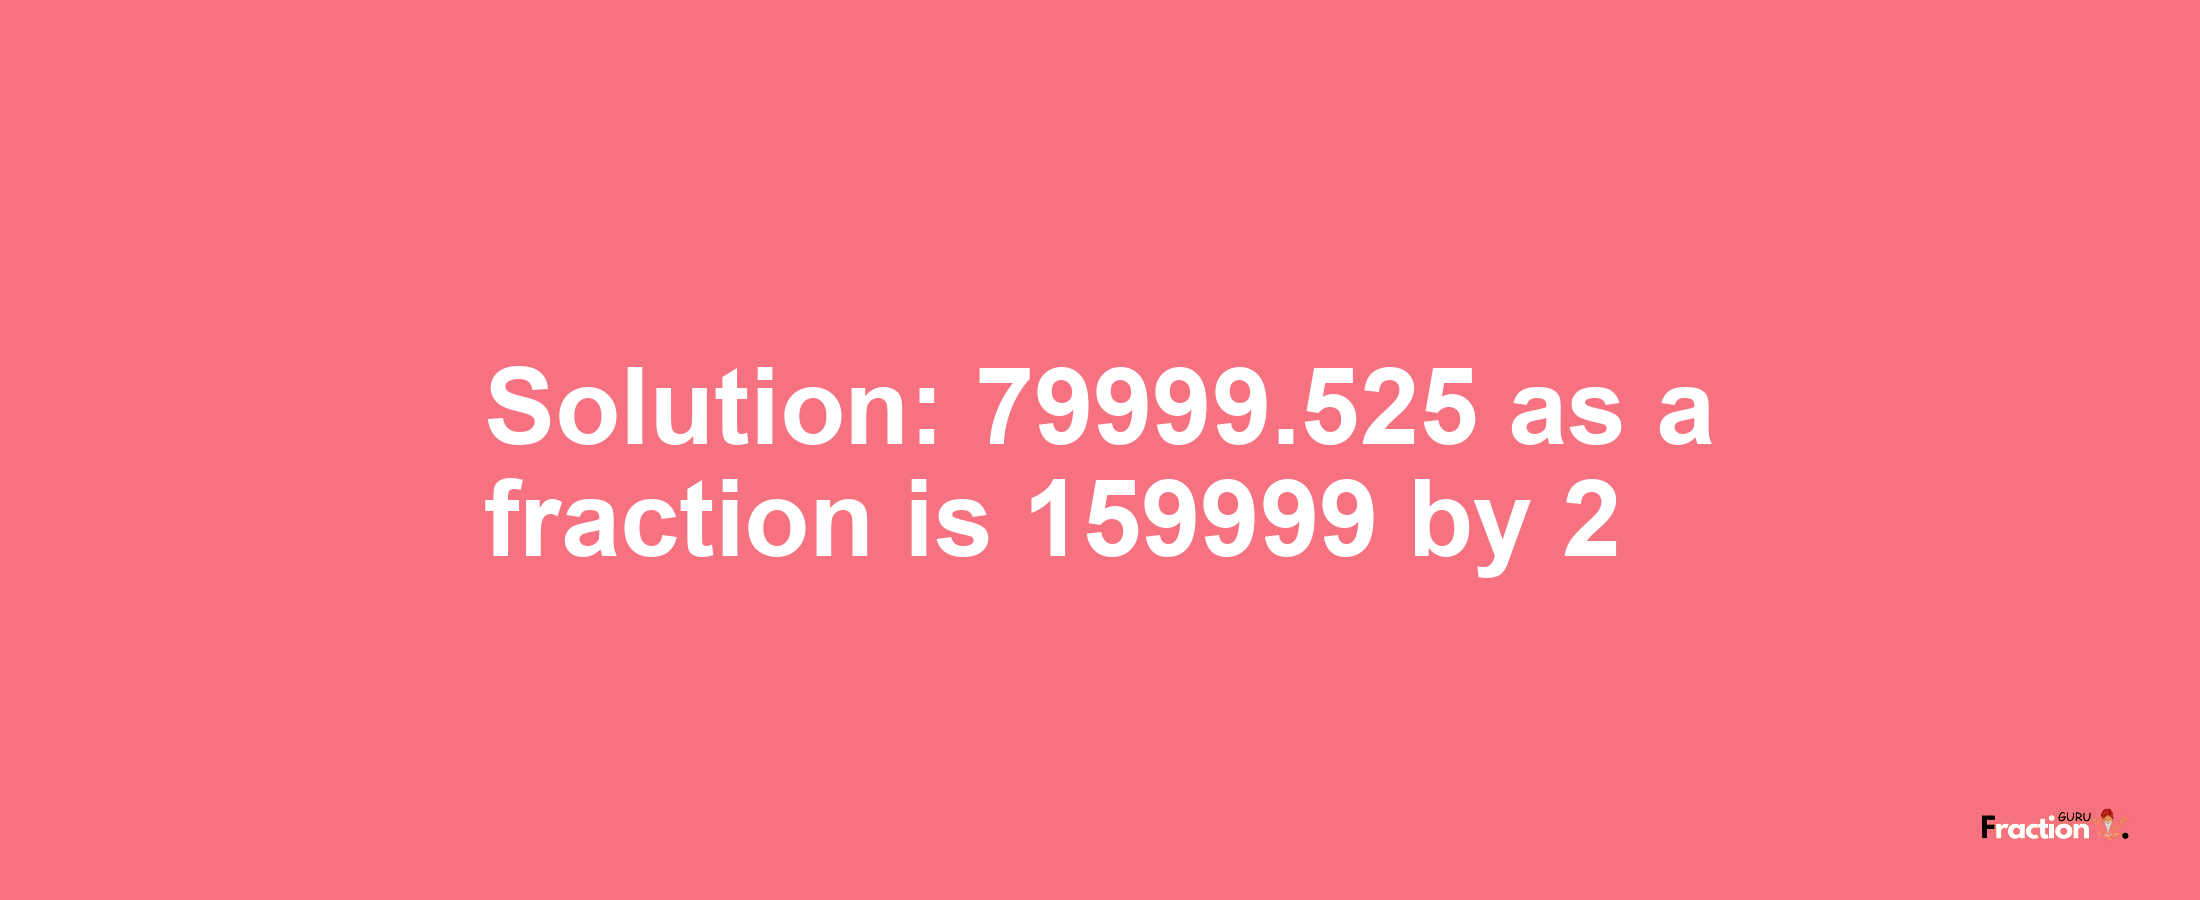 Solution:79999.525 as a fraction is 159999/2